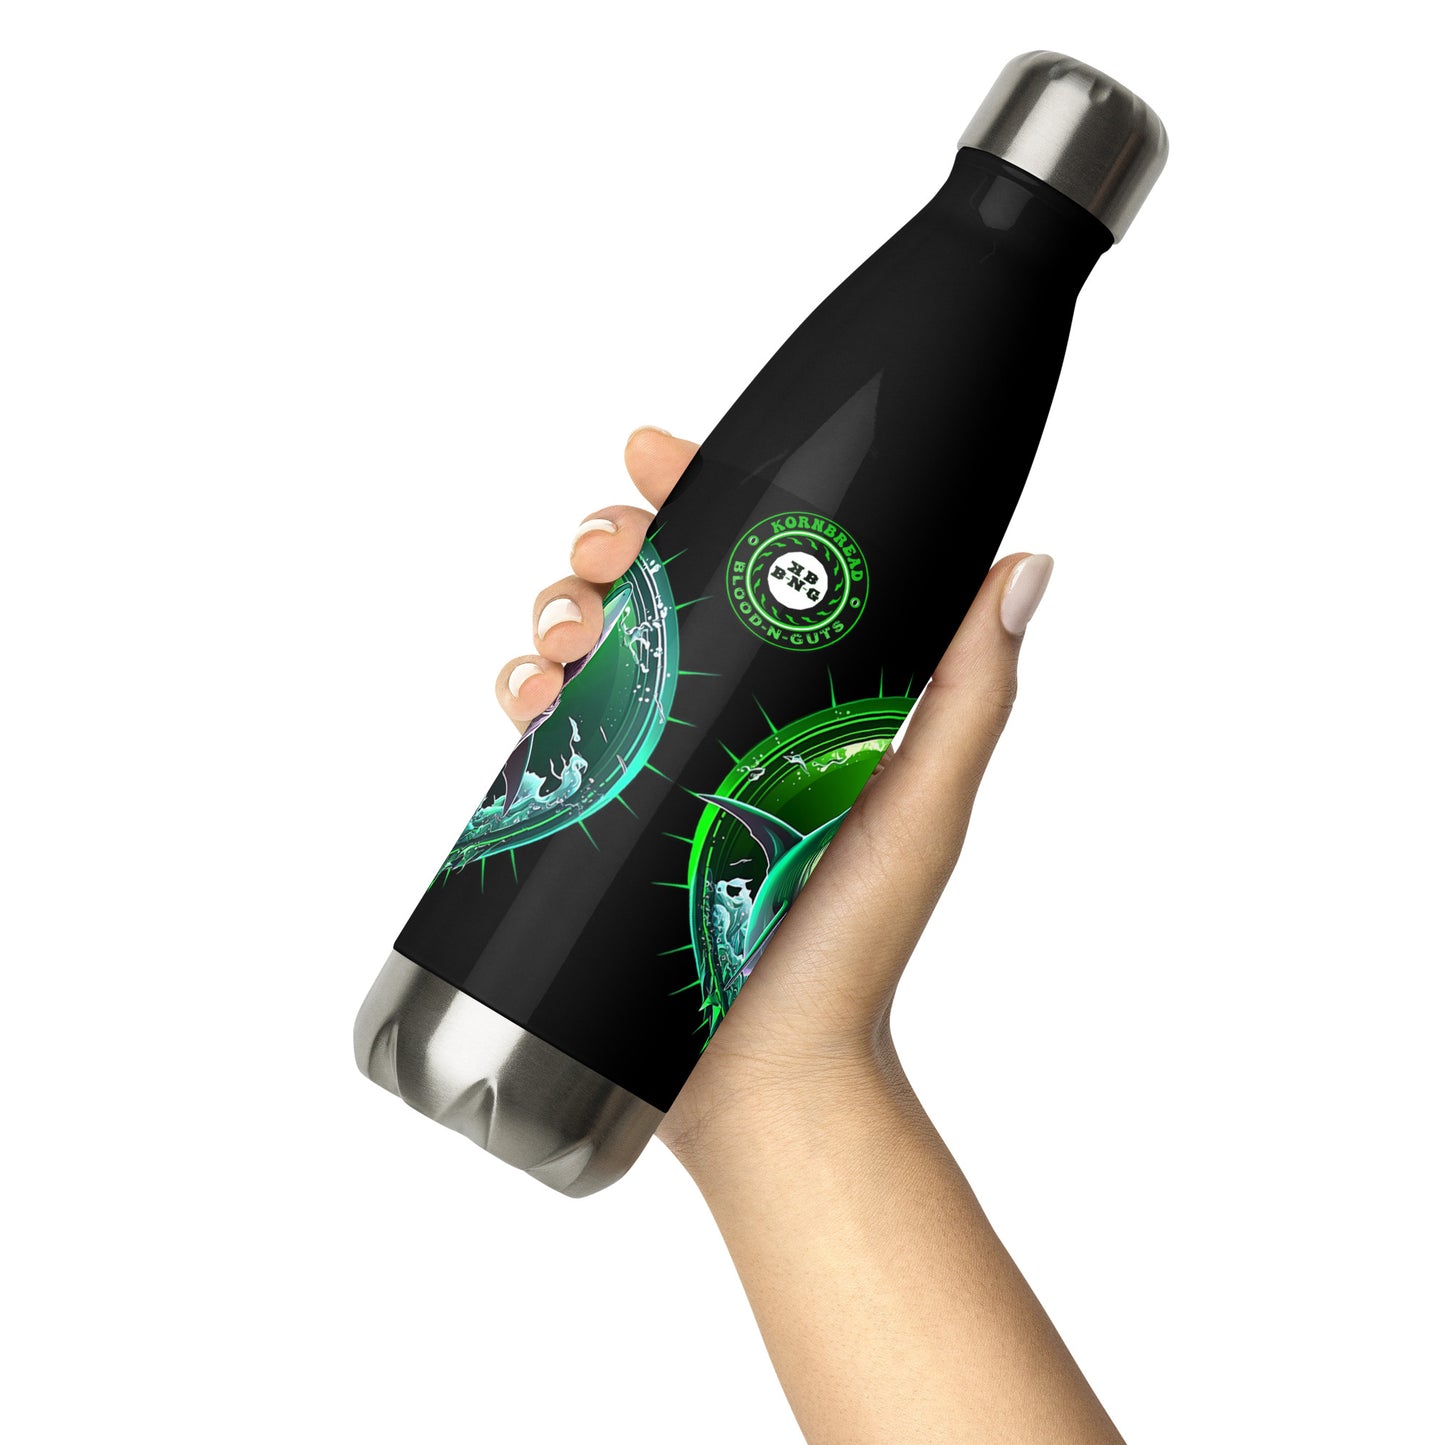 Seditious Shark Stainless Steel Water Bottle